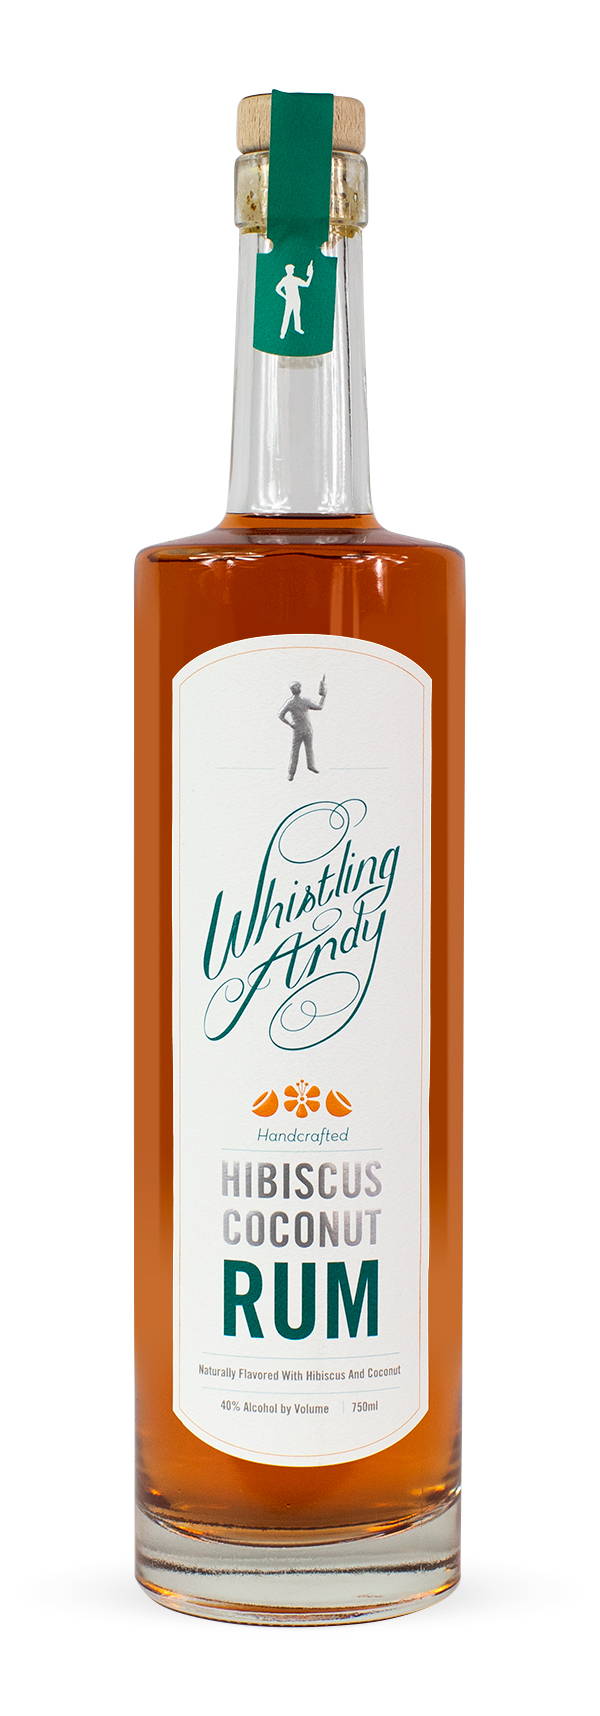 Whistling Andy - Hibiscus Coconut Rum